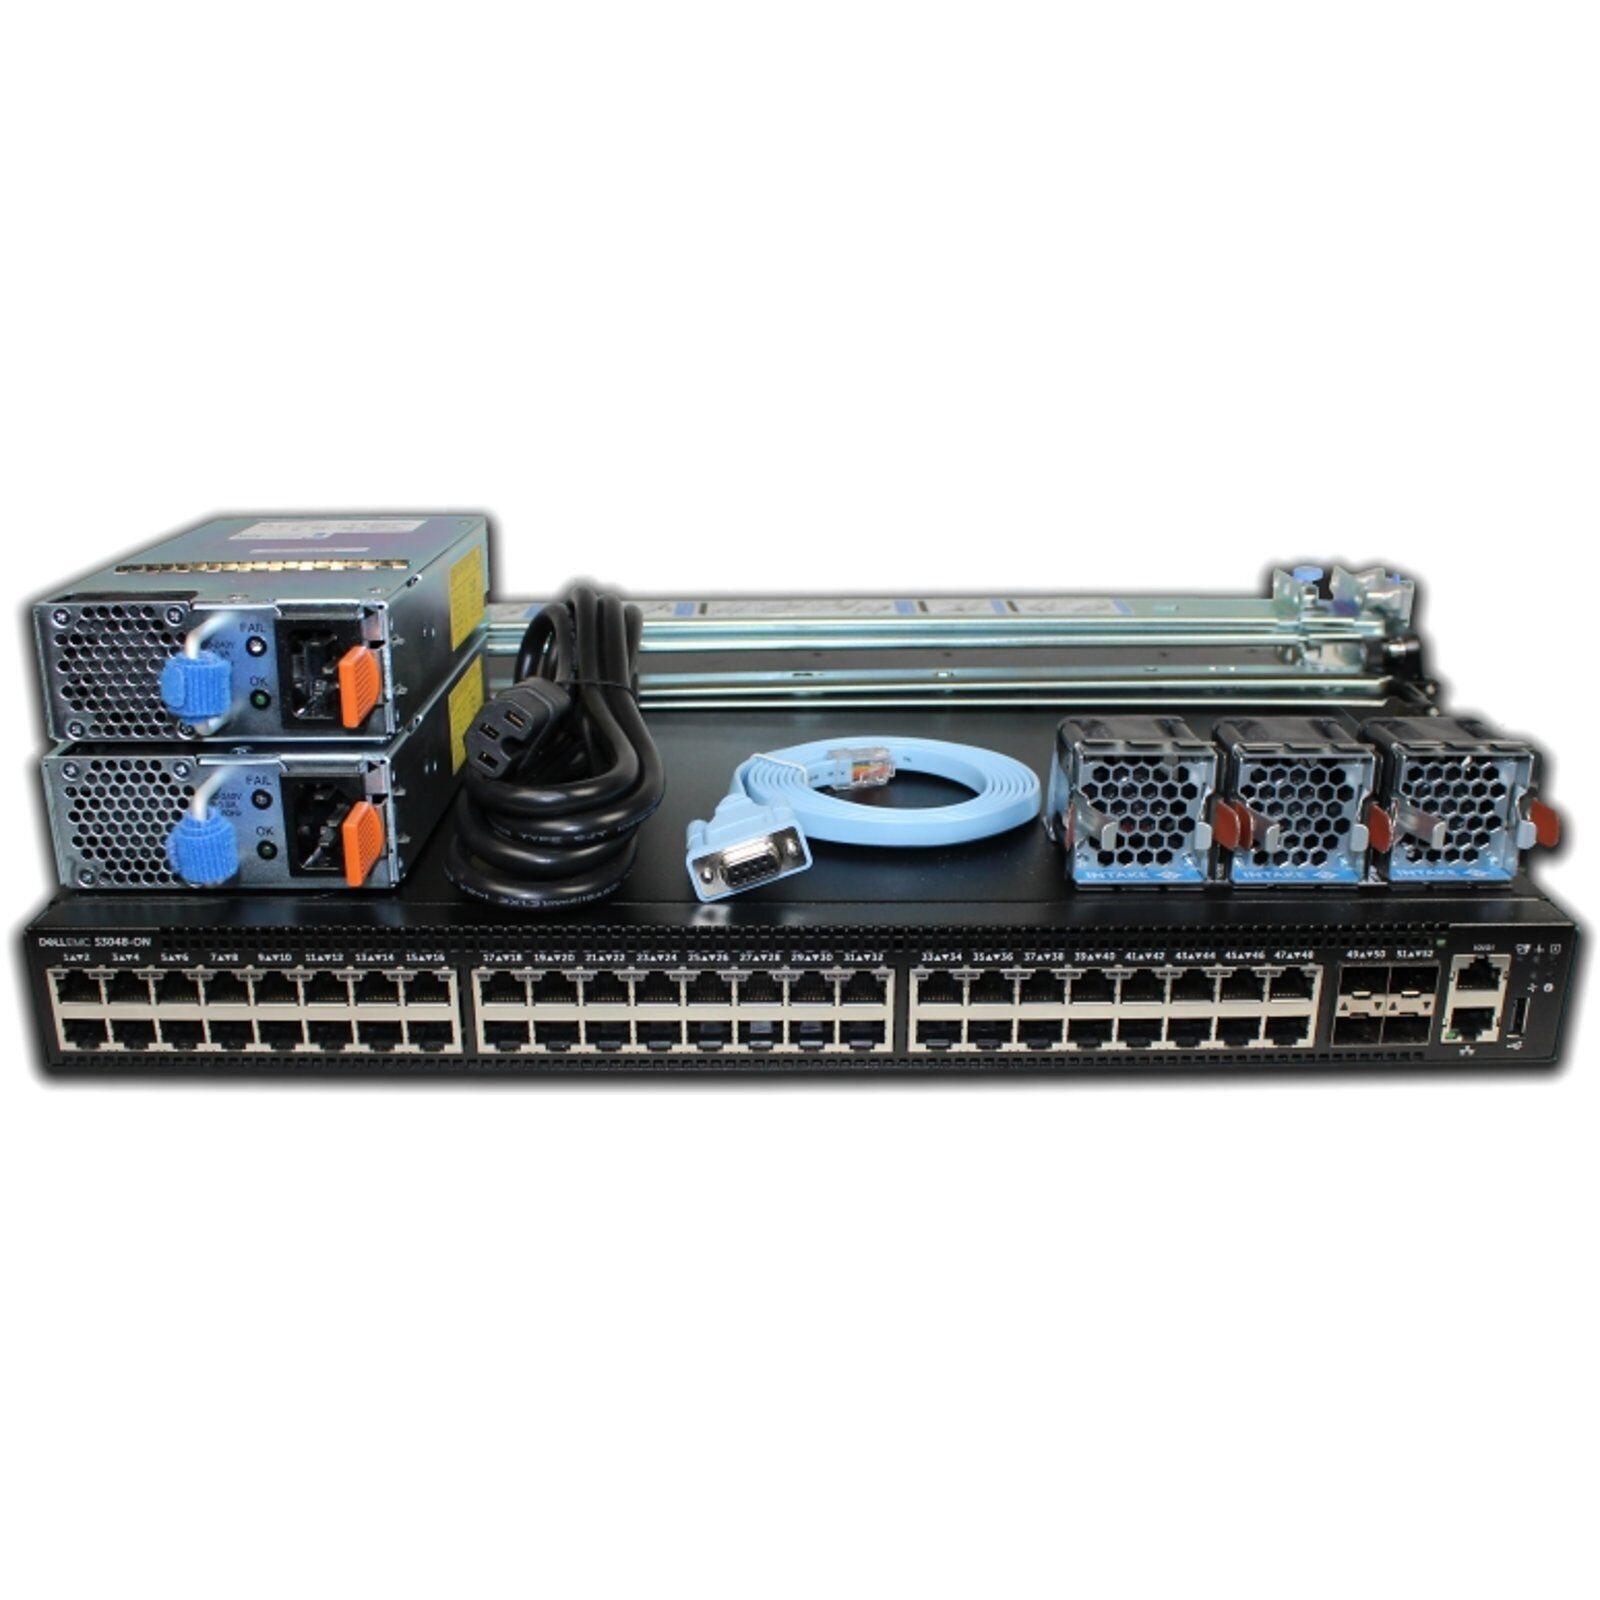 Dell Networking S3048-ON 48P 1GbE 4P SFP+ PSU to I/O 2 PSU Switch